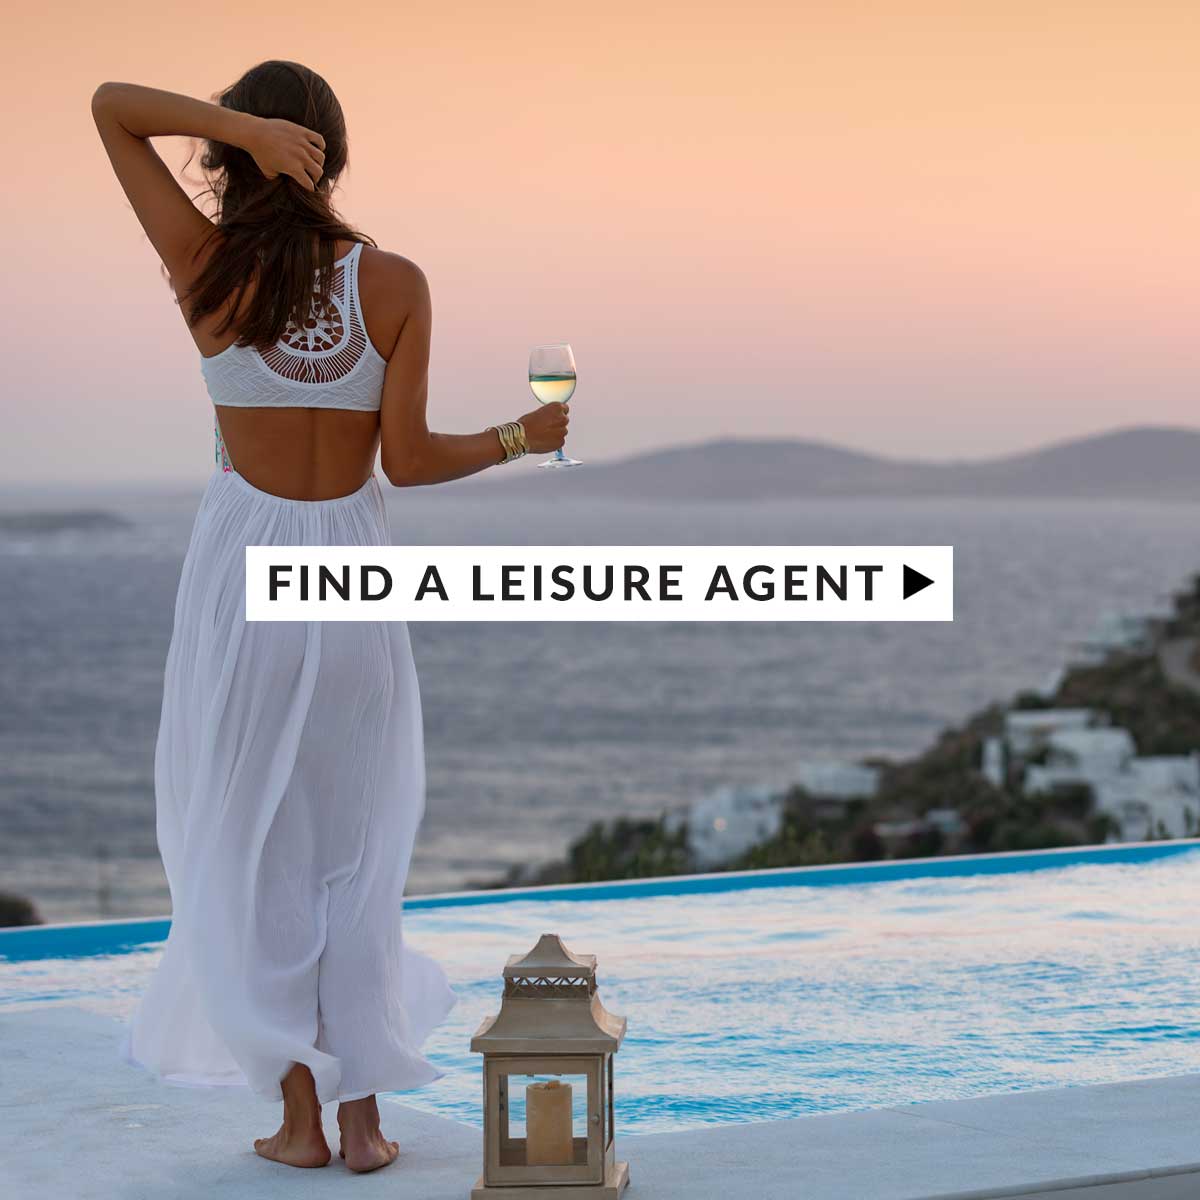 Find a Leisure Agent